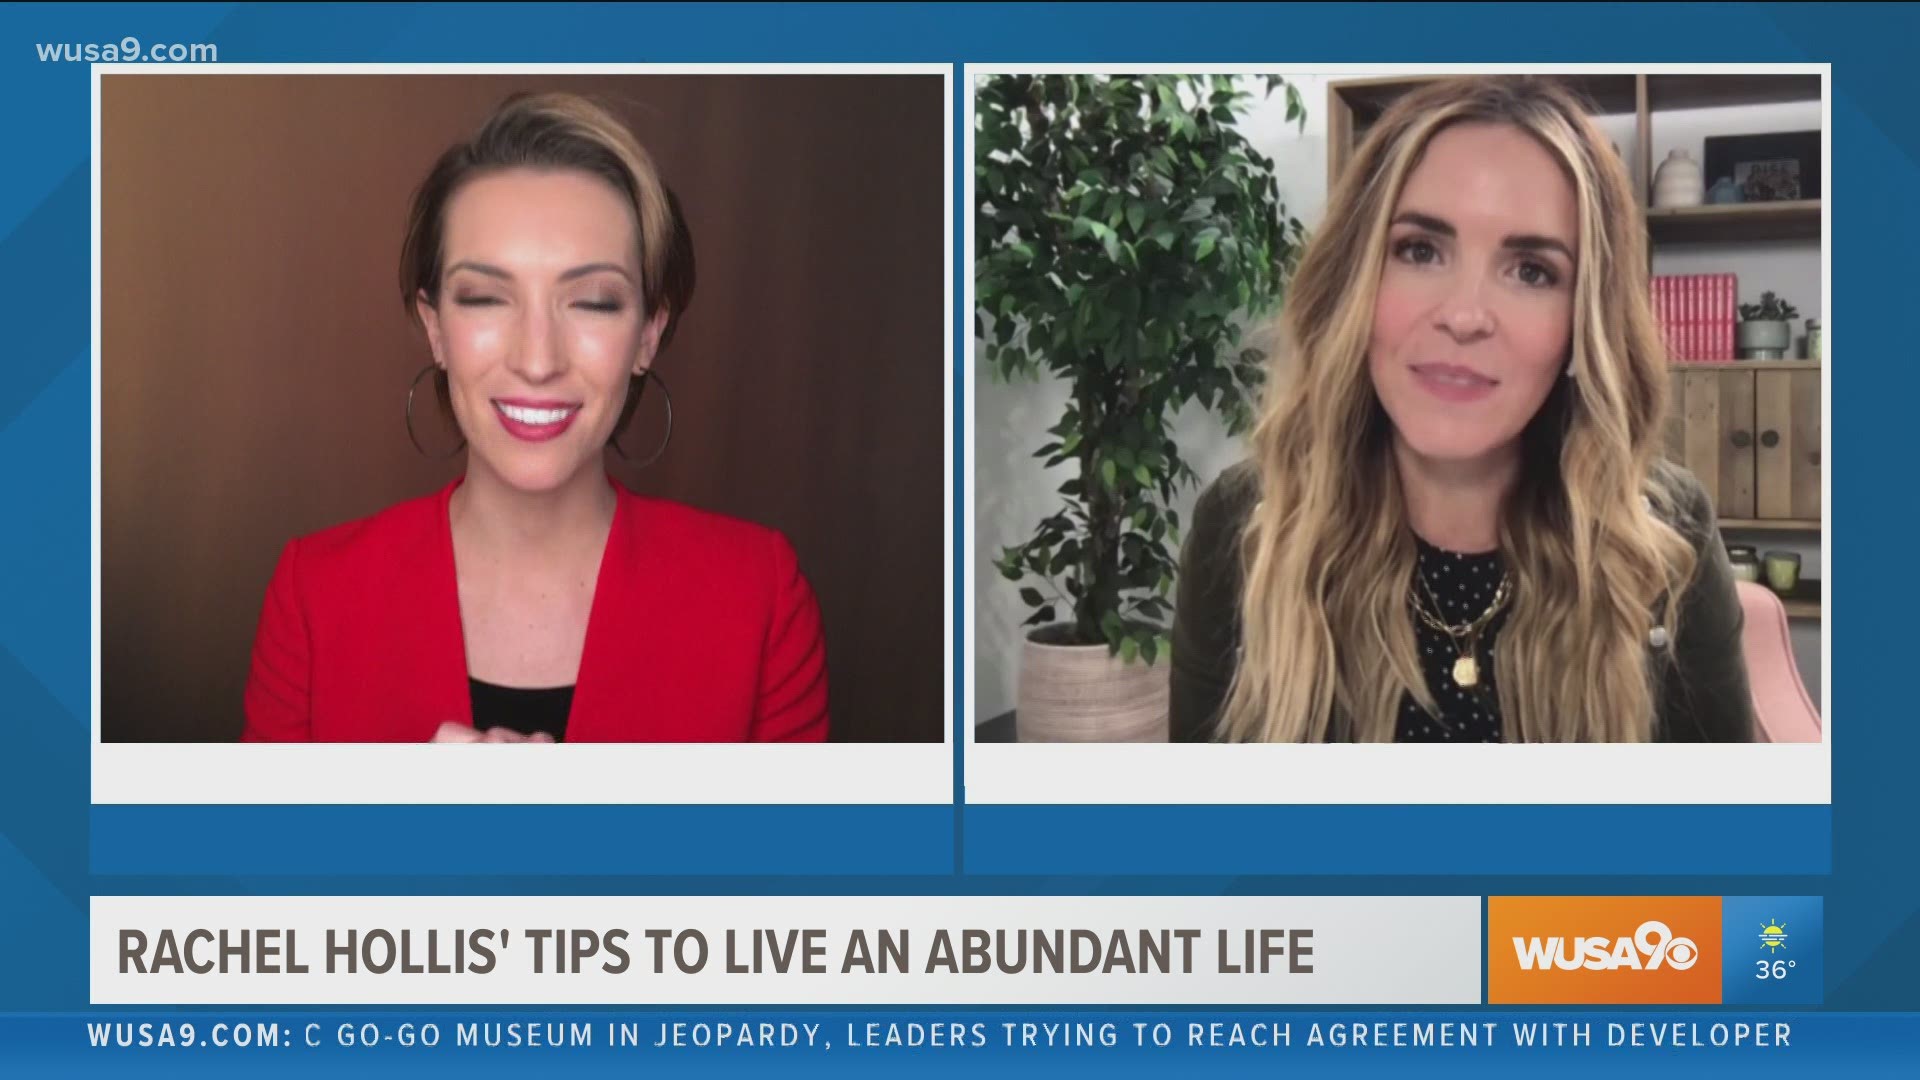 Rachel Hollis, founder and CEO of Rise, shares some tips on how to make 2021 the best year yet.